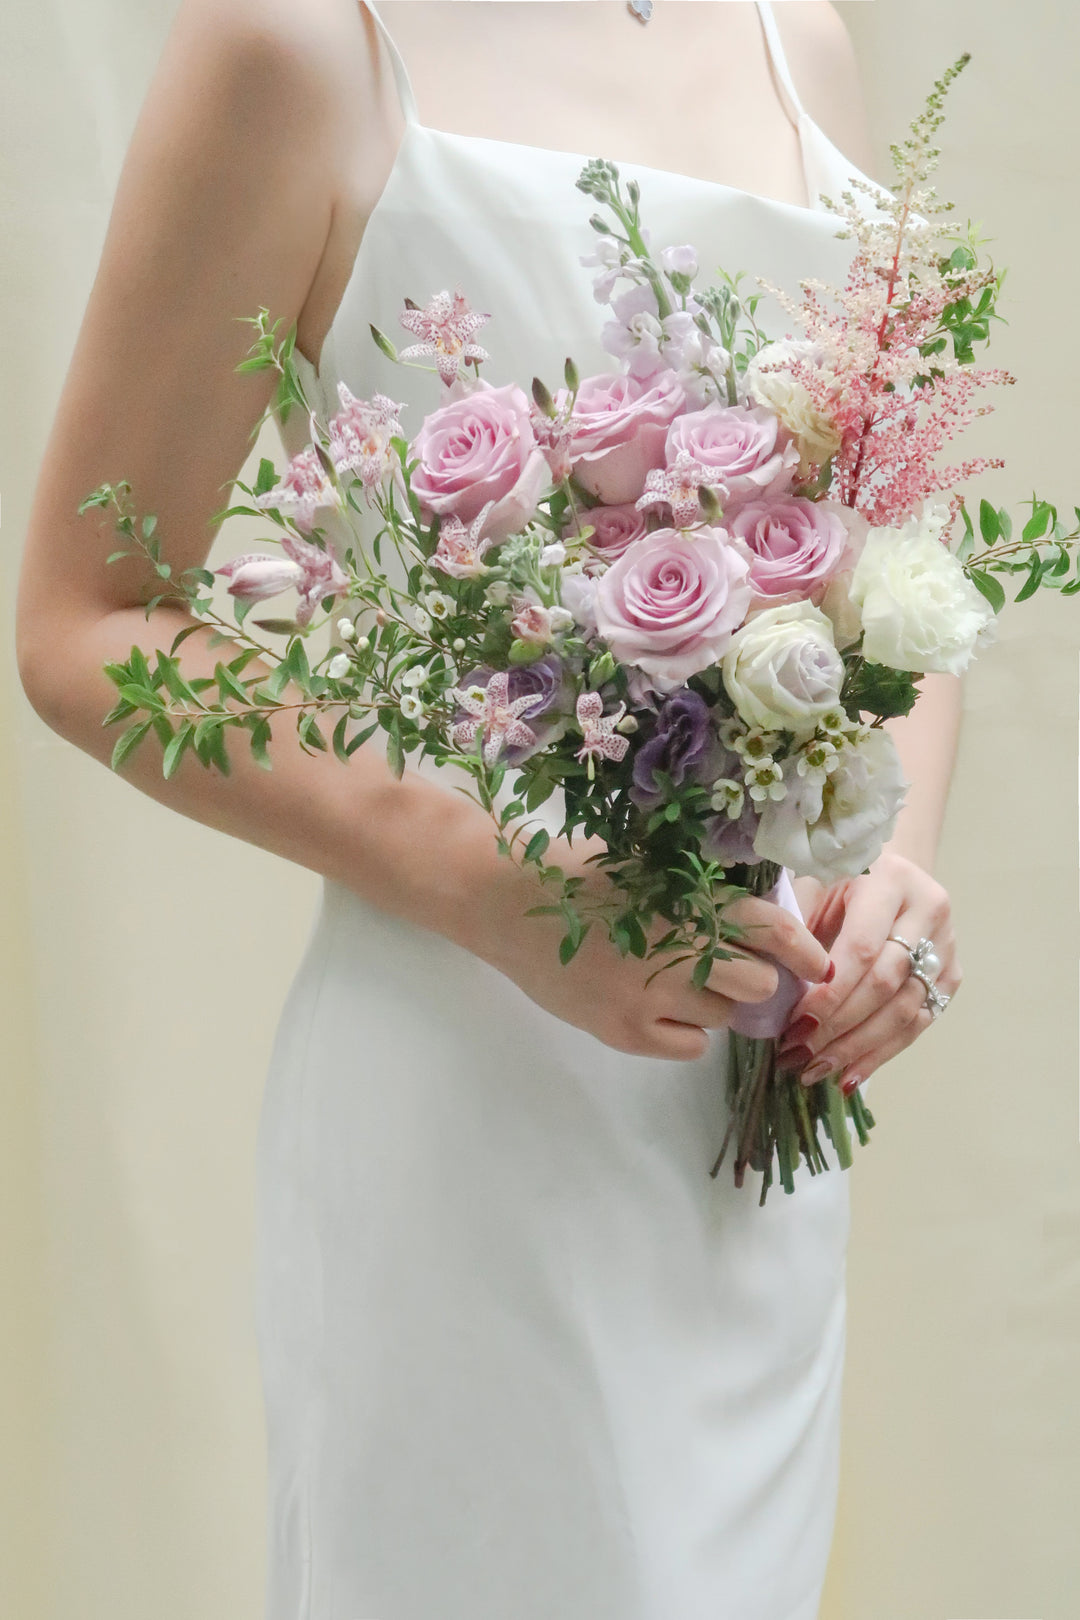 Bridal Bouquet - Hand-tied - Lilac